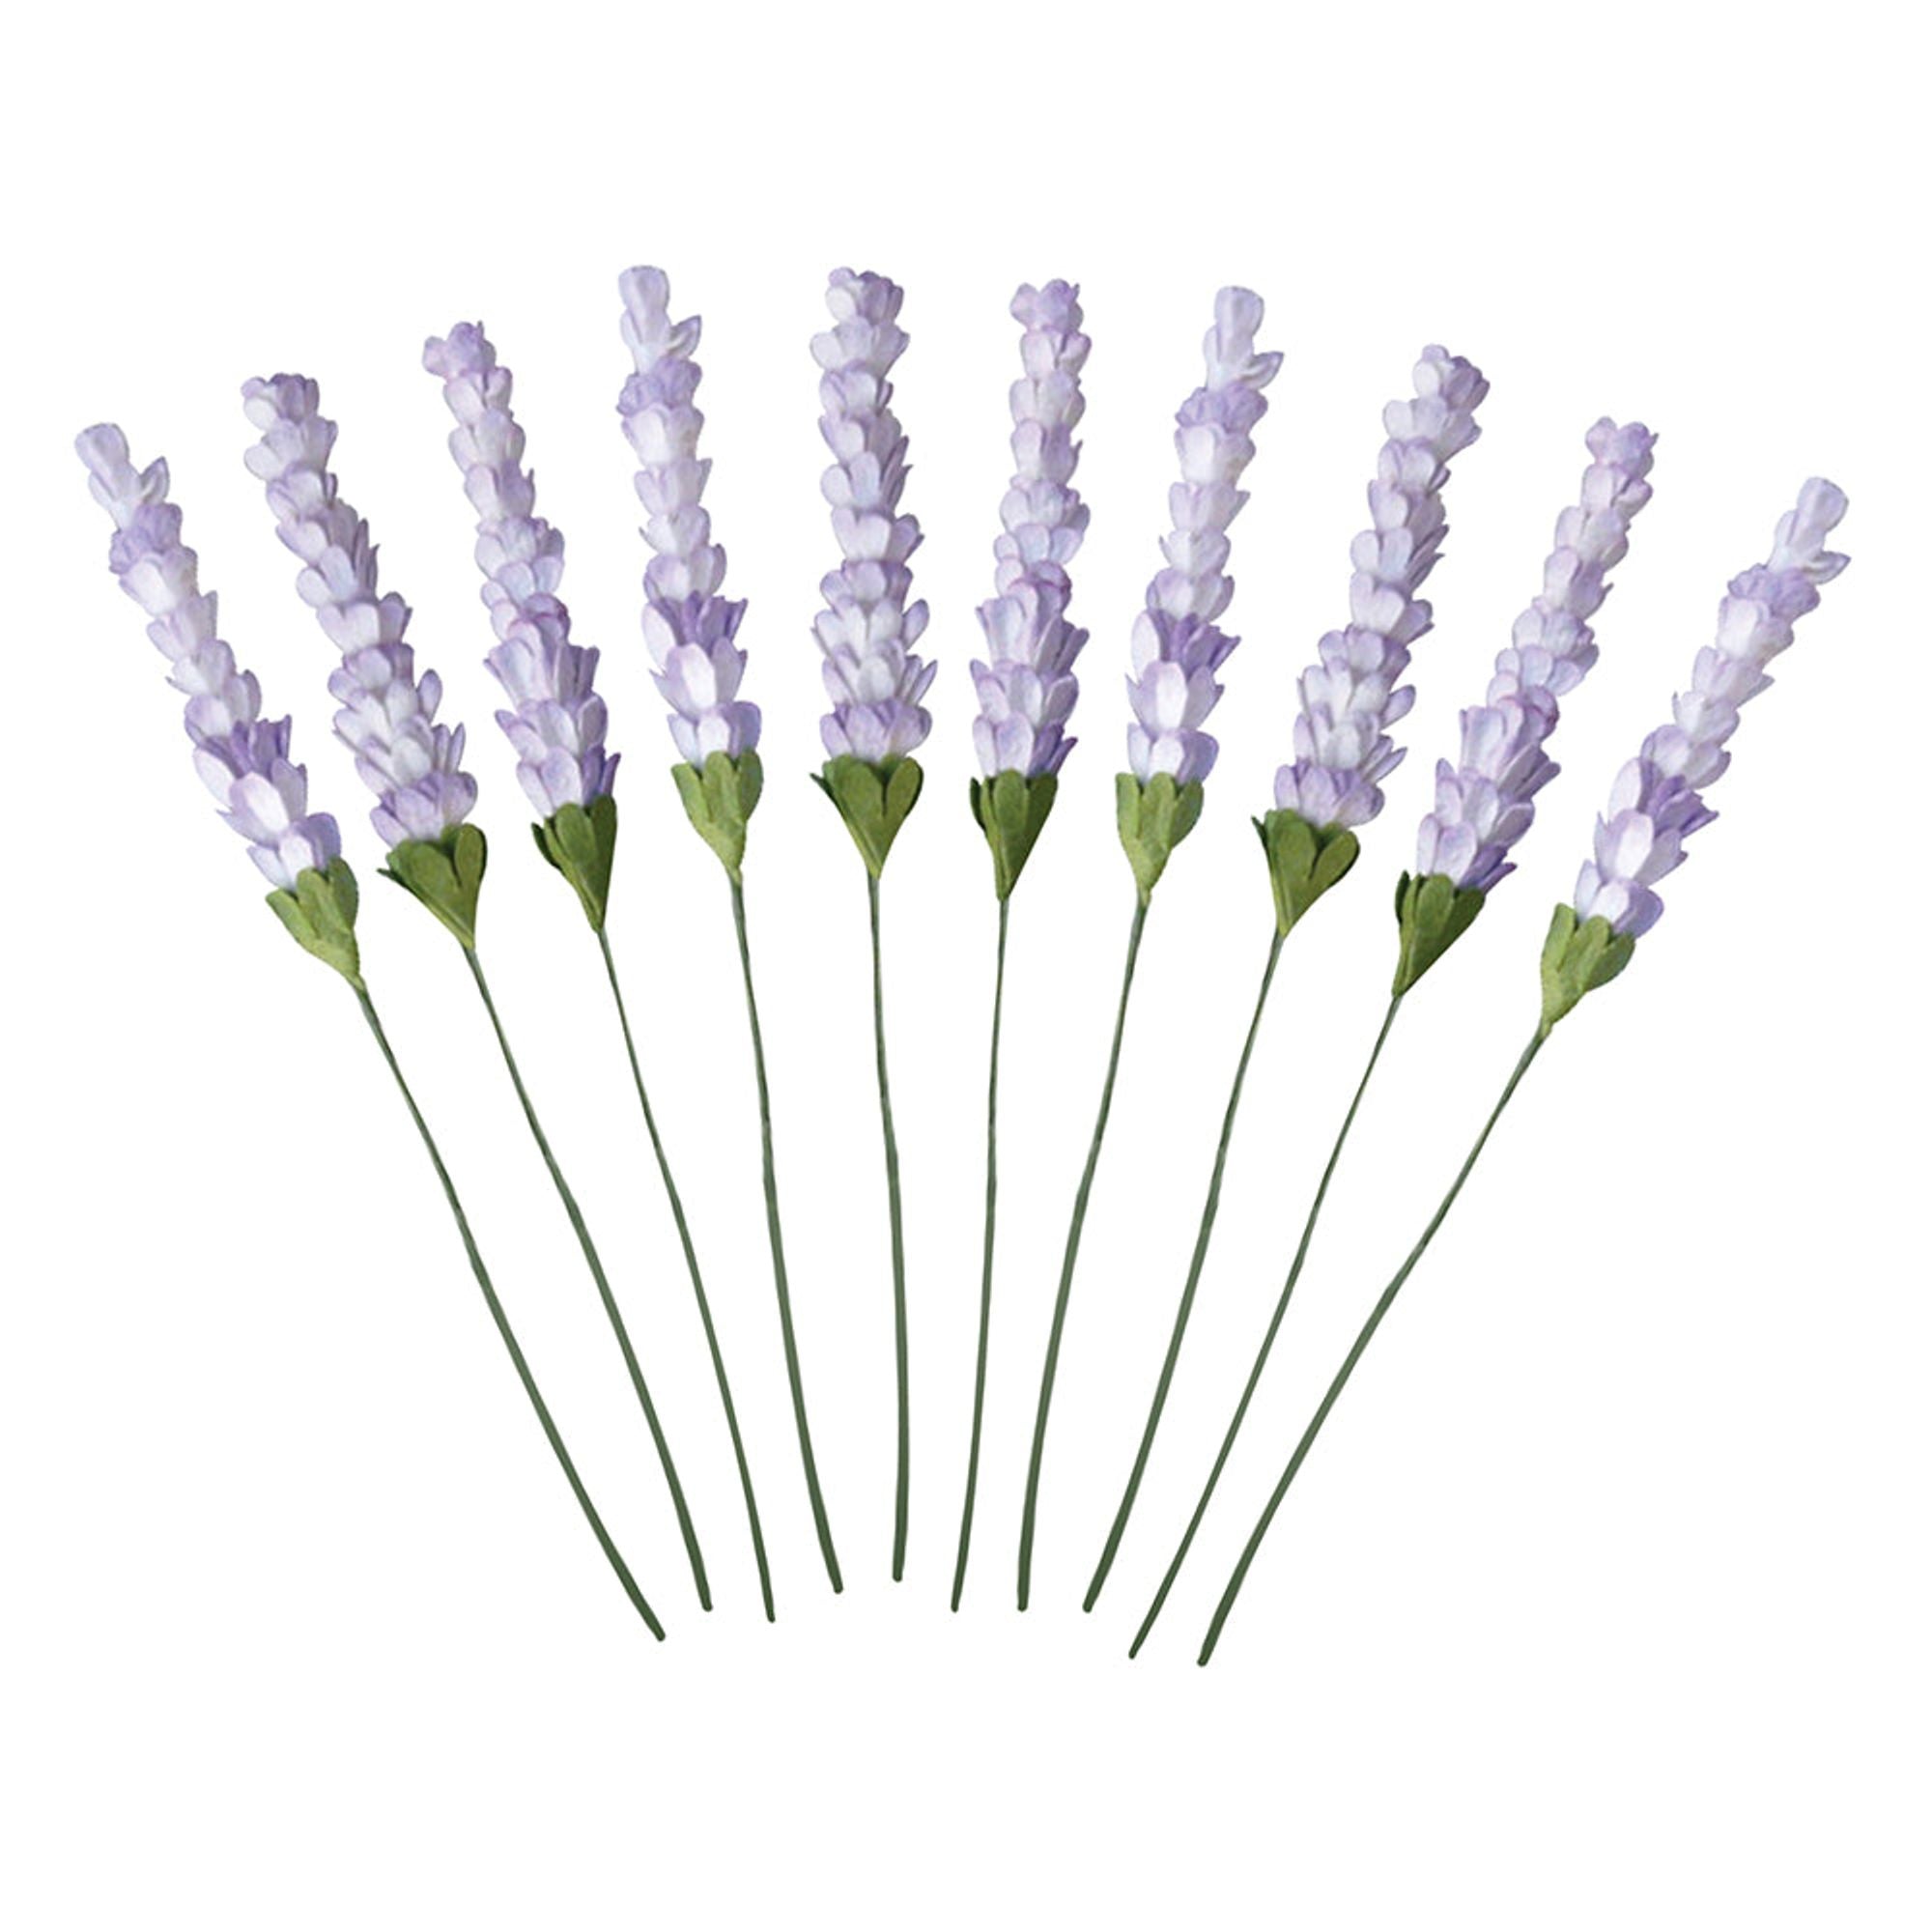 Couture Creations - Lavender Love Paper Flowers - 2-Tone Lilac Mulberry Paper Lavender Stems (10pc)